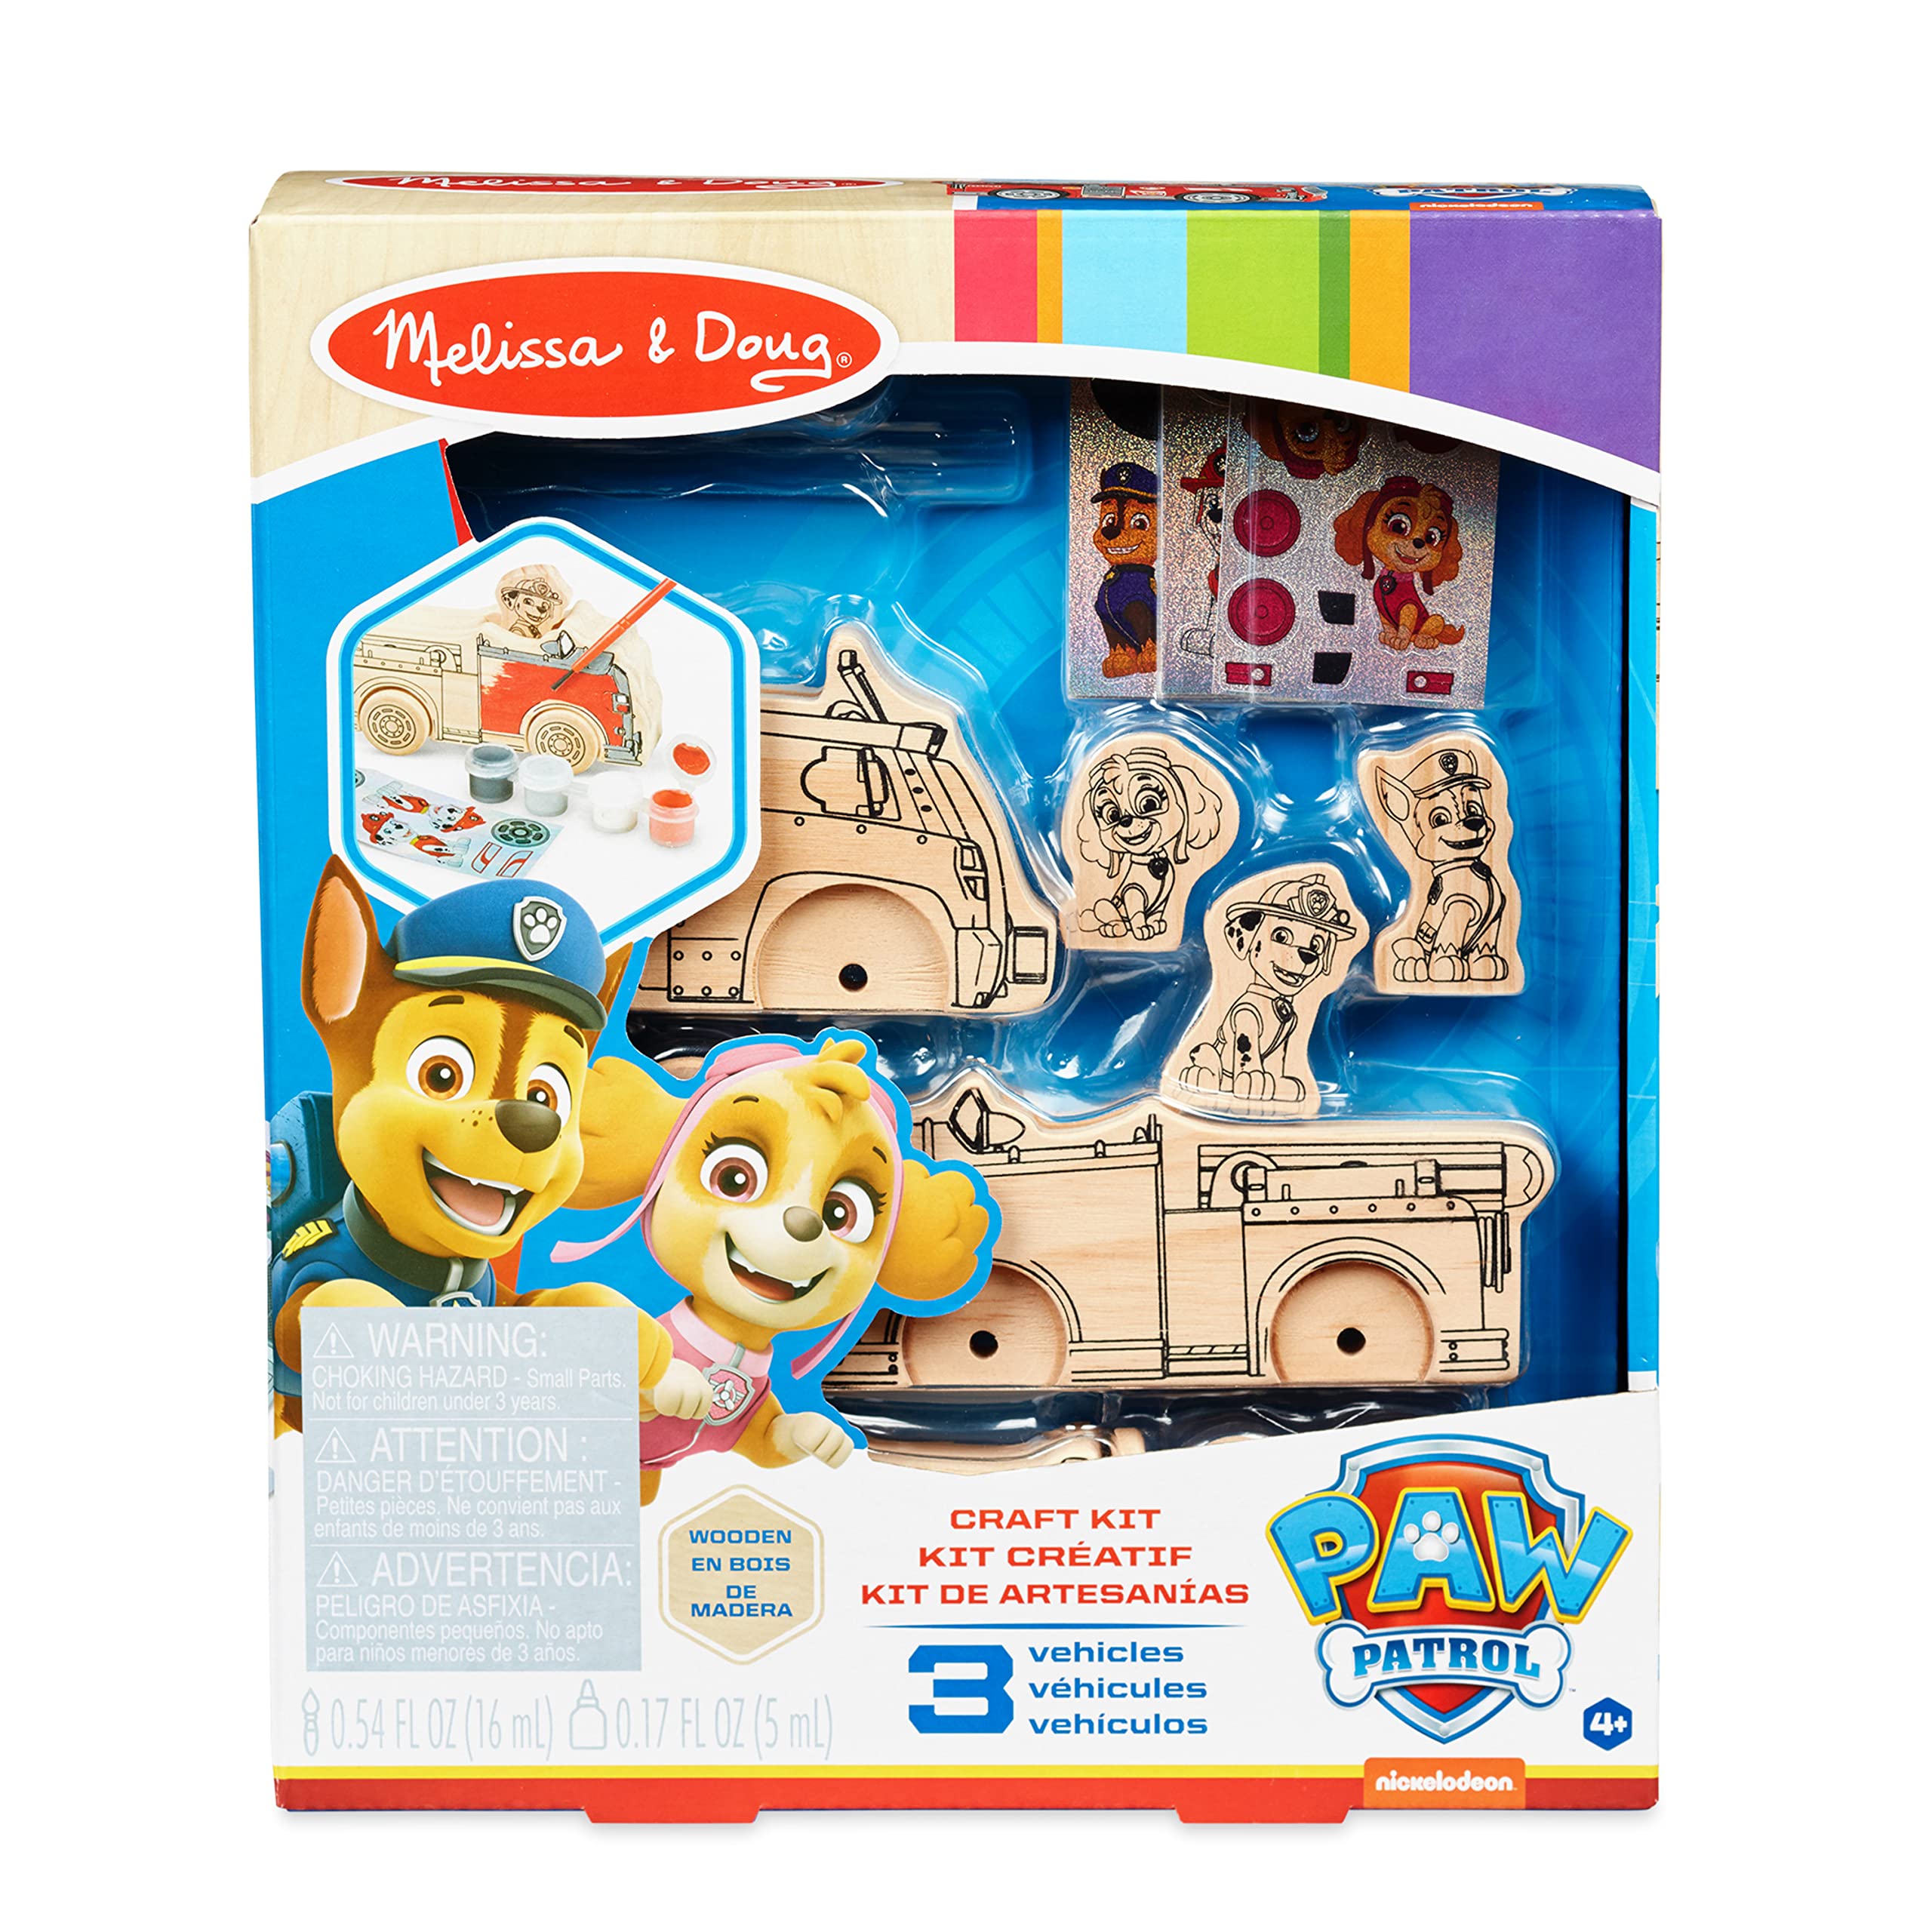 Melissa & Doug Paw Patrol Wooden Vehicles Craft Kit w/ 3 Decorate Your Own Vehicles and 3 Play Figures $9.96 + Free Shipping w/ Prime or on $35+